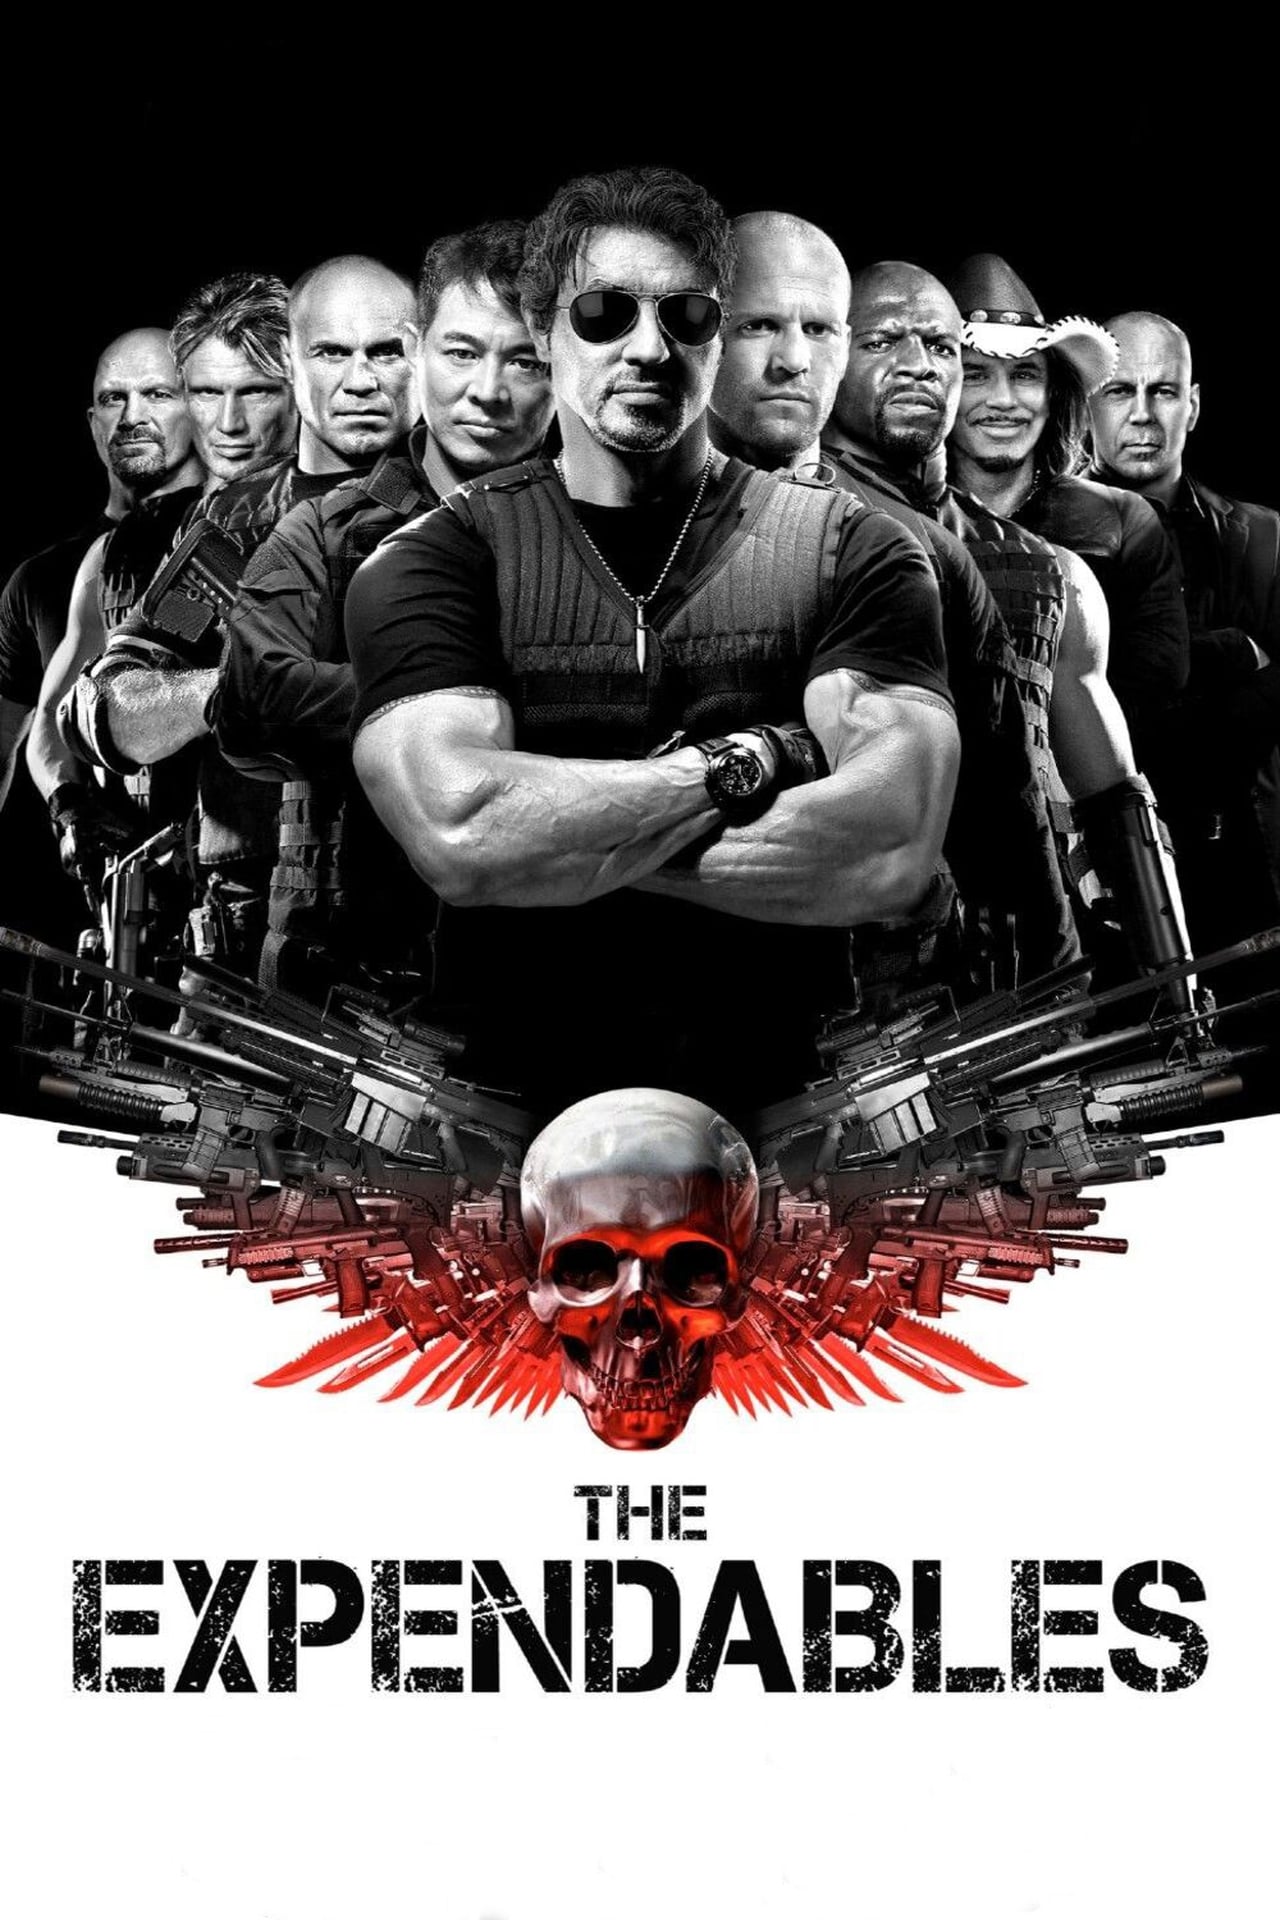 The Expendables (2010) 640Kbps 23.976Fps 48Khz 5.1Ch BluRay Turkish Audio TAC